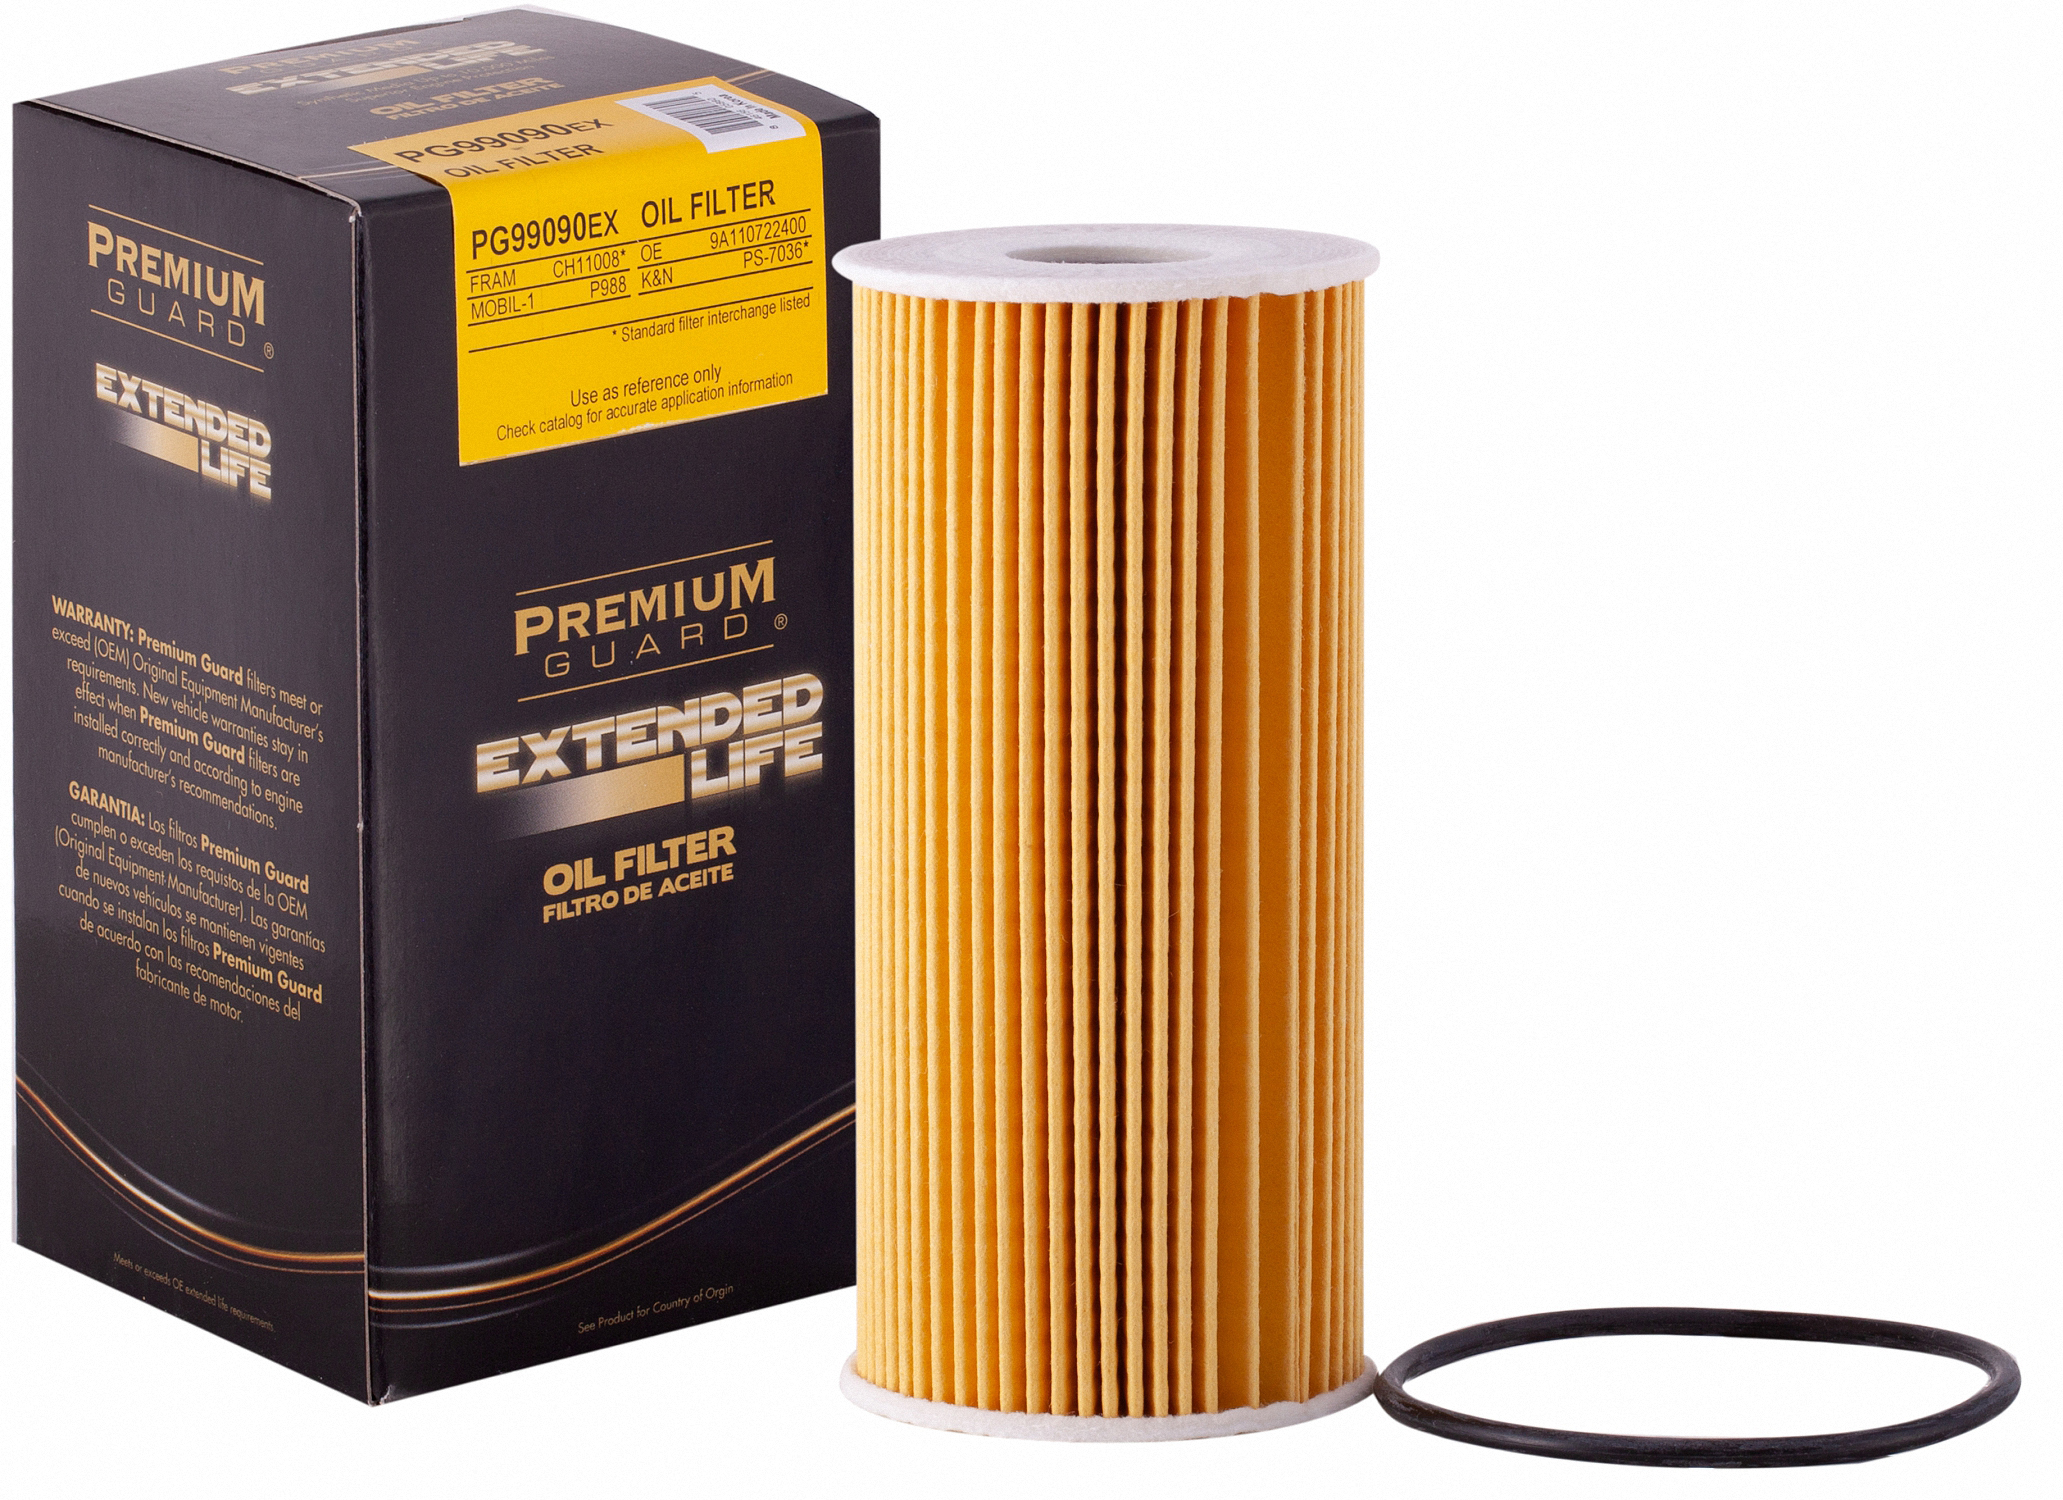 Premium PG99090EX Extended Life Oil Filter - image 1 of 5